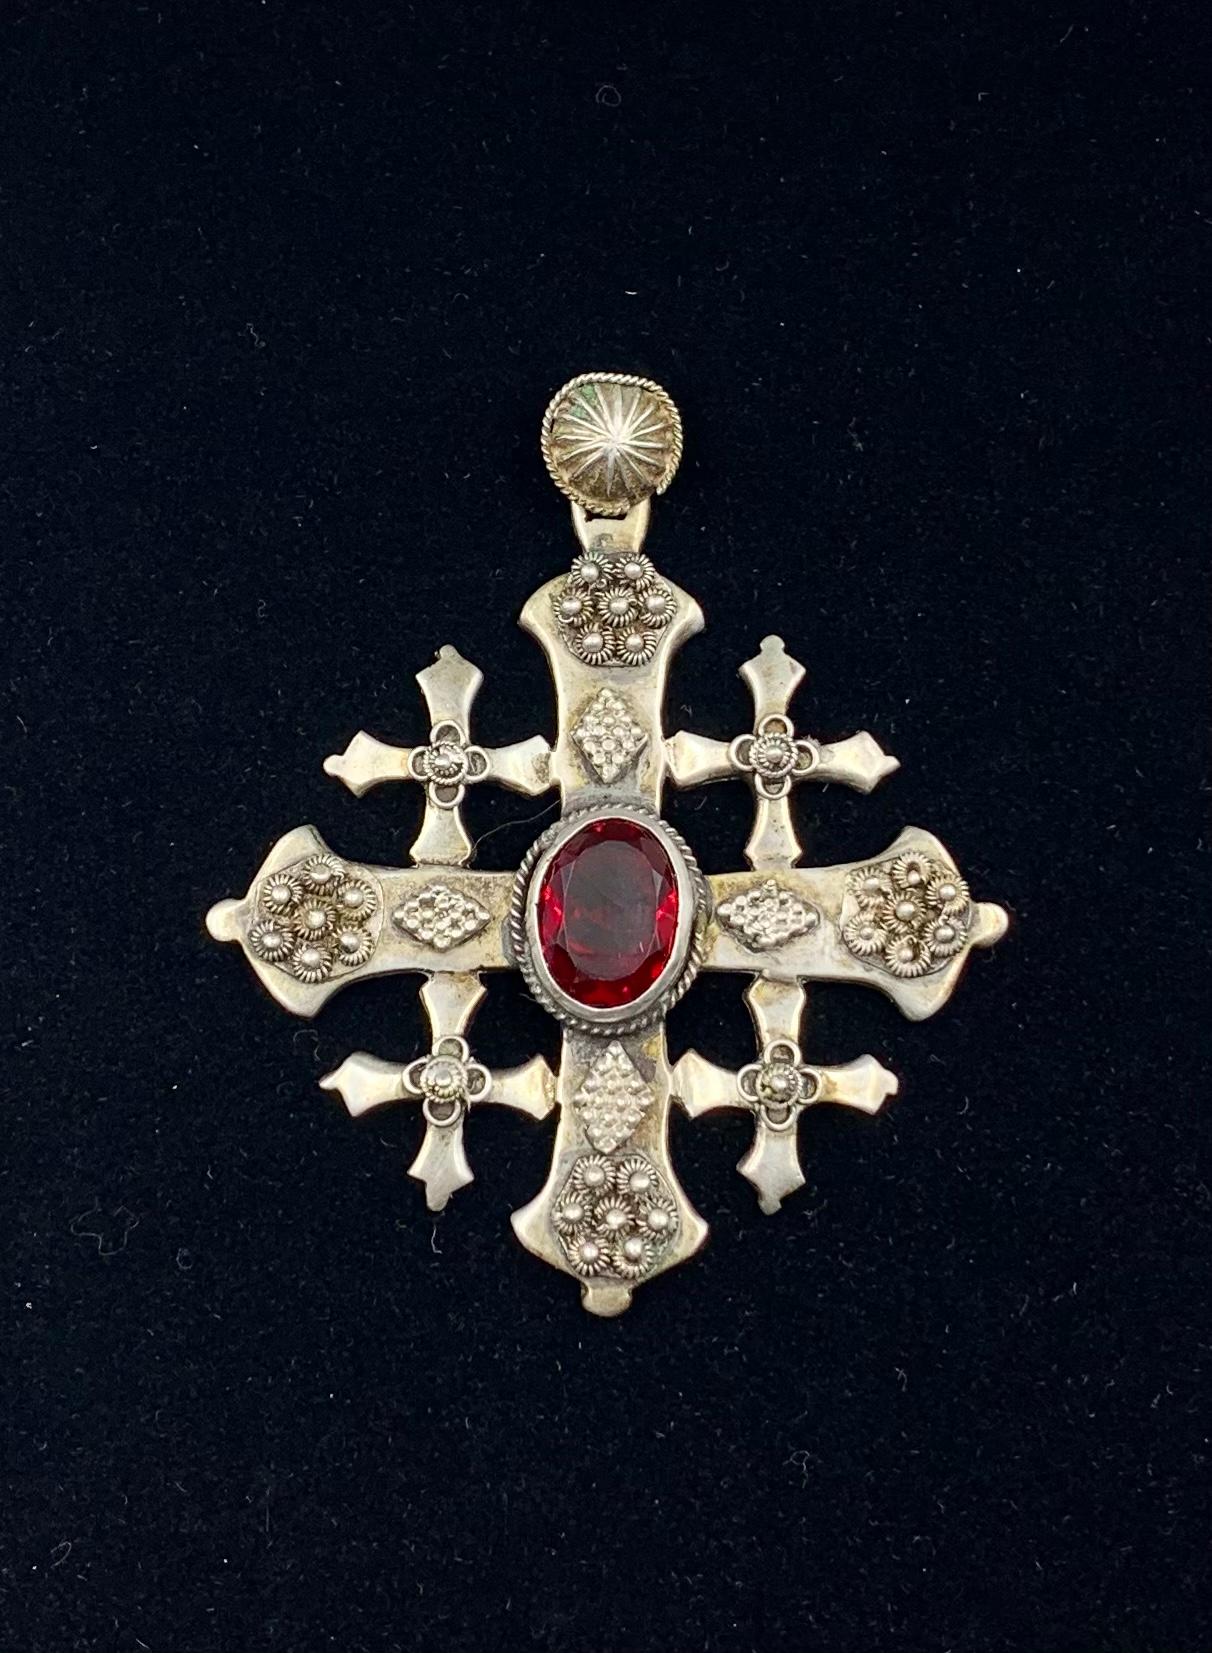 Beautiful Byzantine style large, substantial antique silver Five-Fold cross pendant with an oval faceted garnet glass center, granulation, silver wire decoration and a circular chased bale.
19th Century
The five-fold cross is symbolic of the five